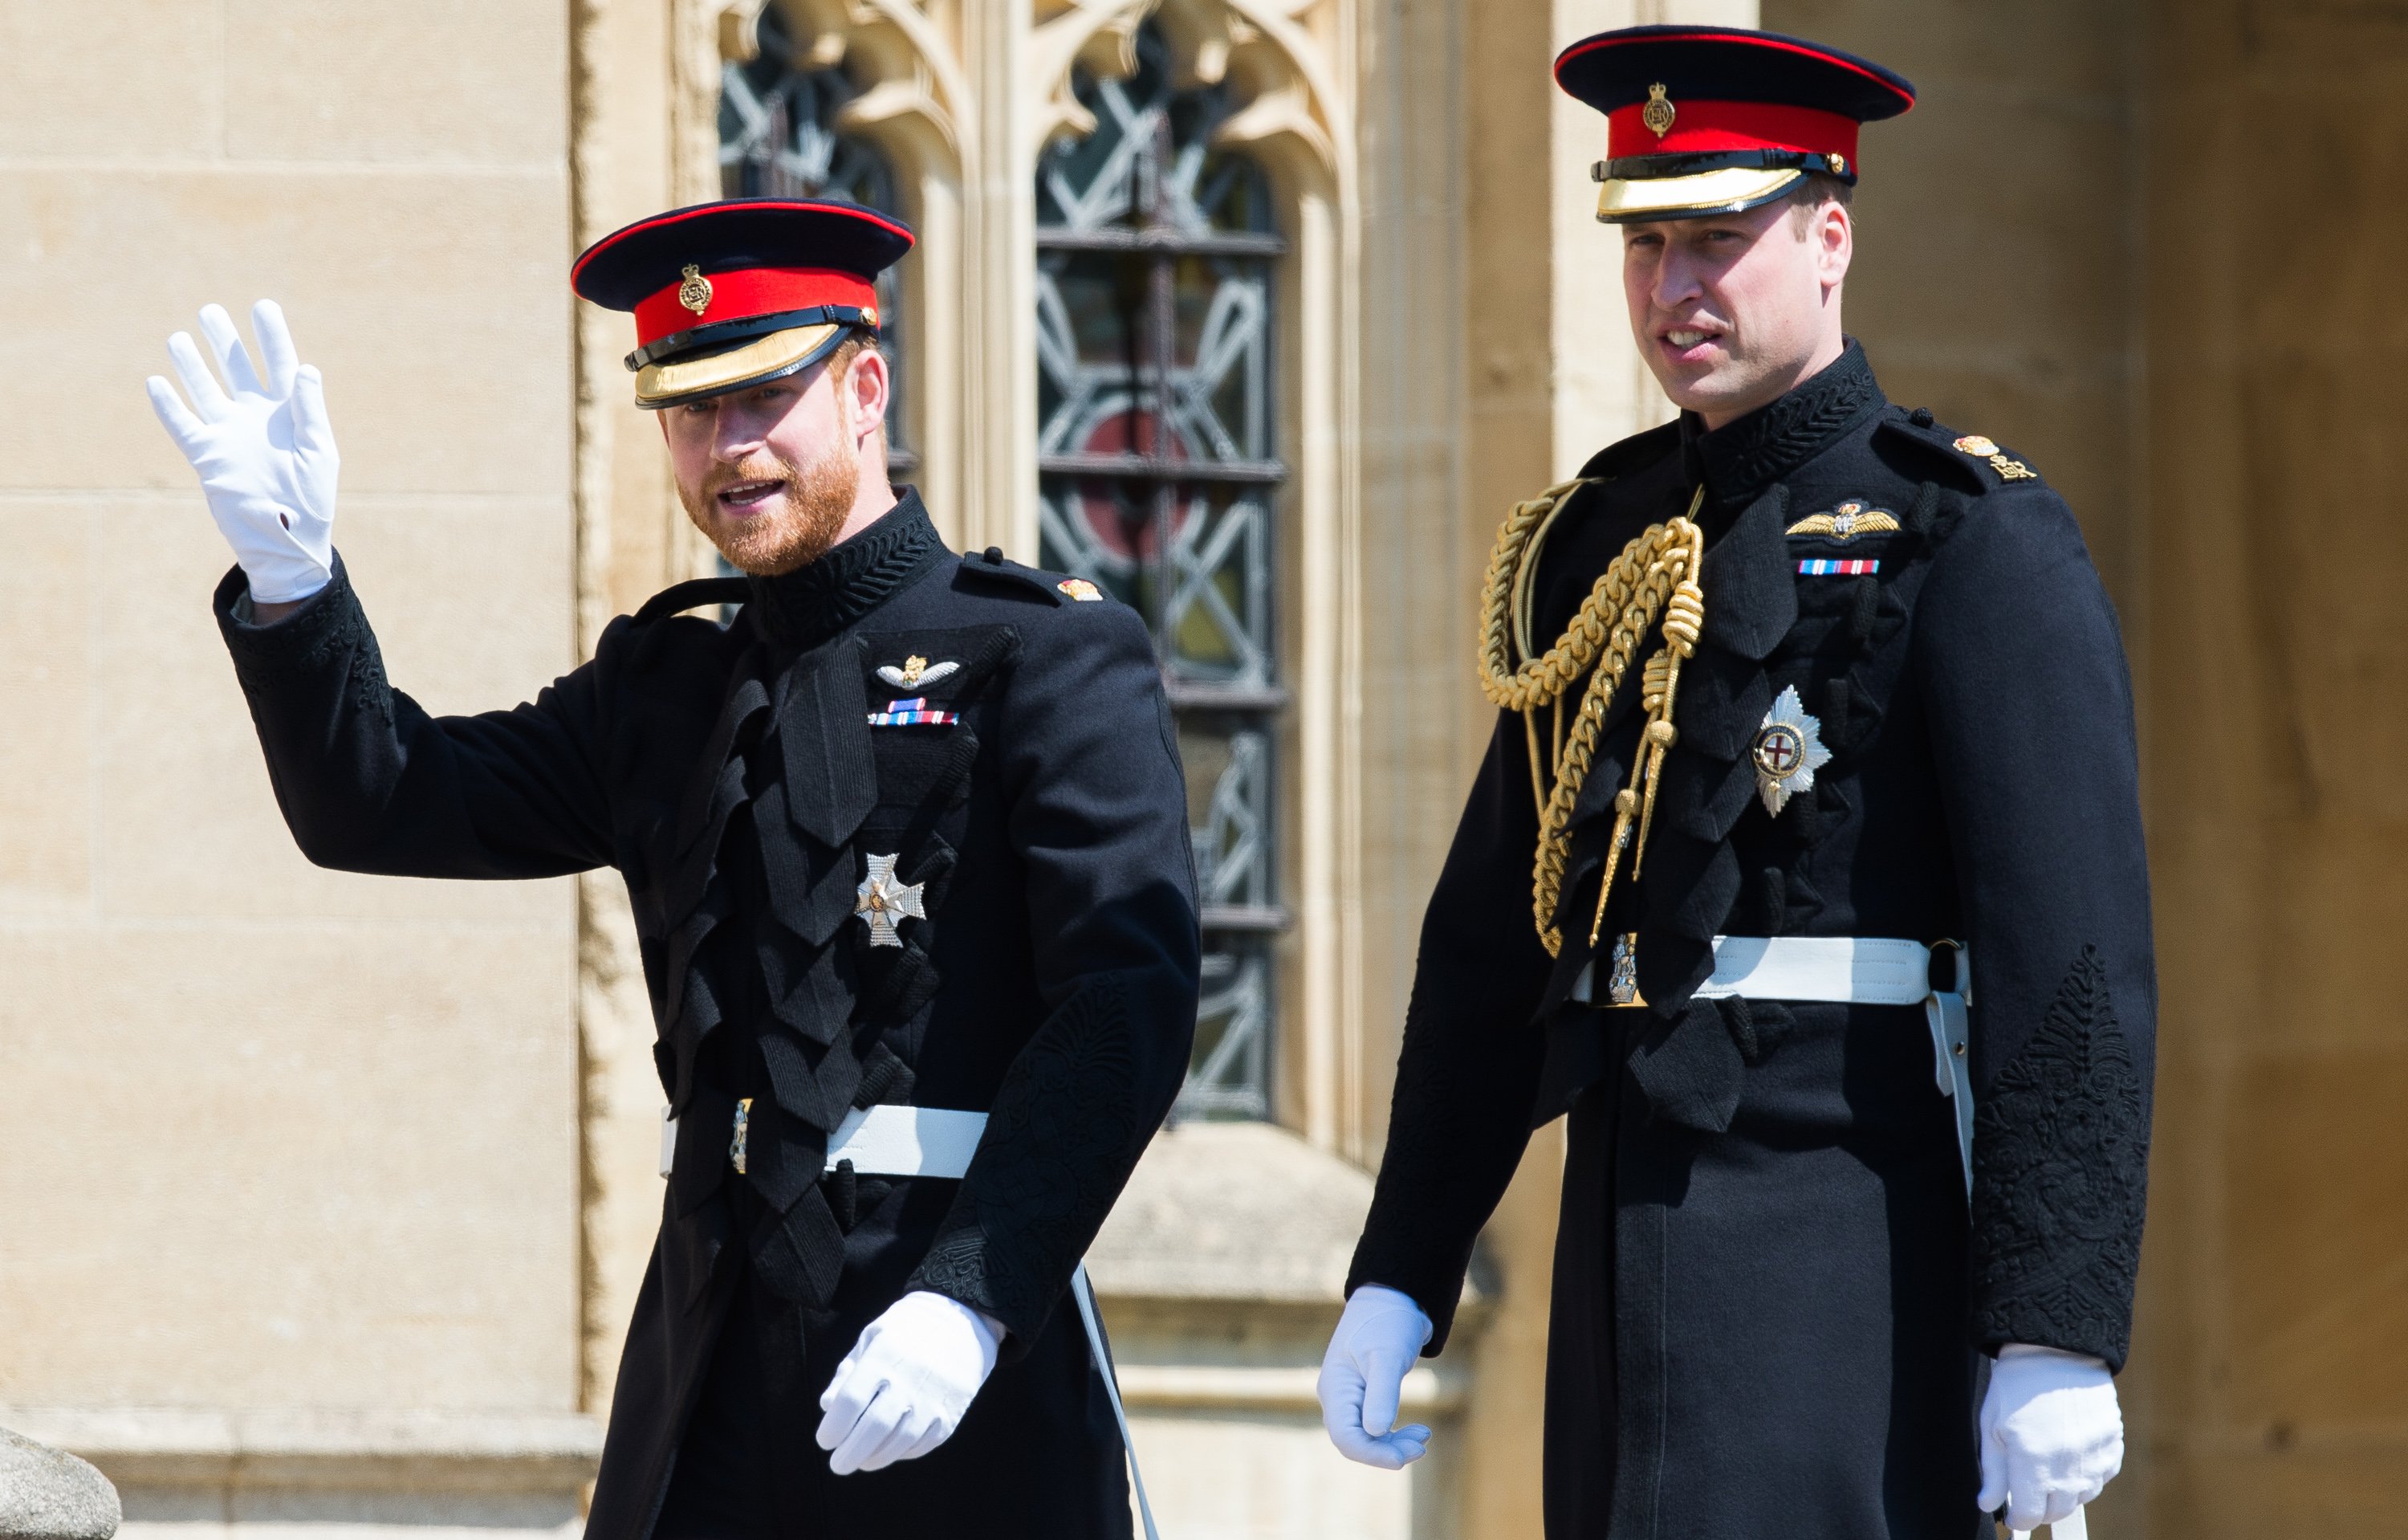 Prince Harry and Prince William arriving at St. George's Chapel for Harry's wedding to Meghan Markle